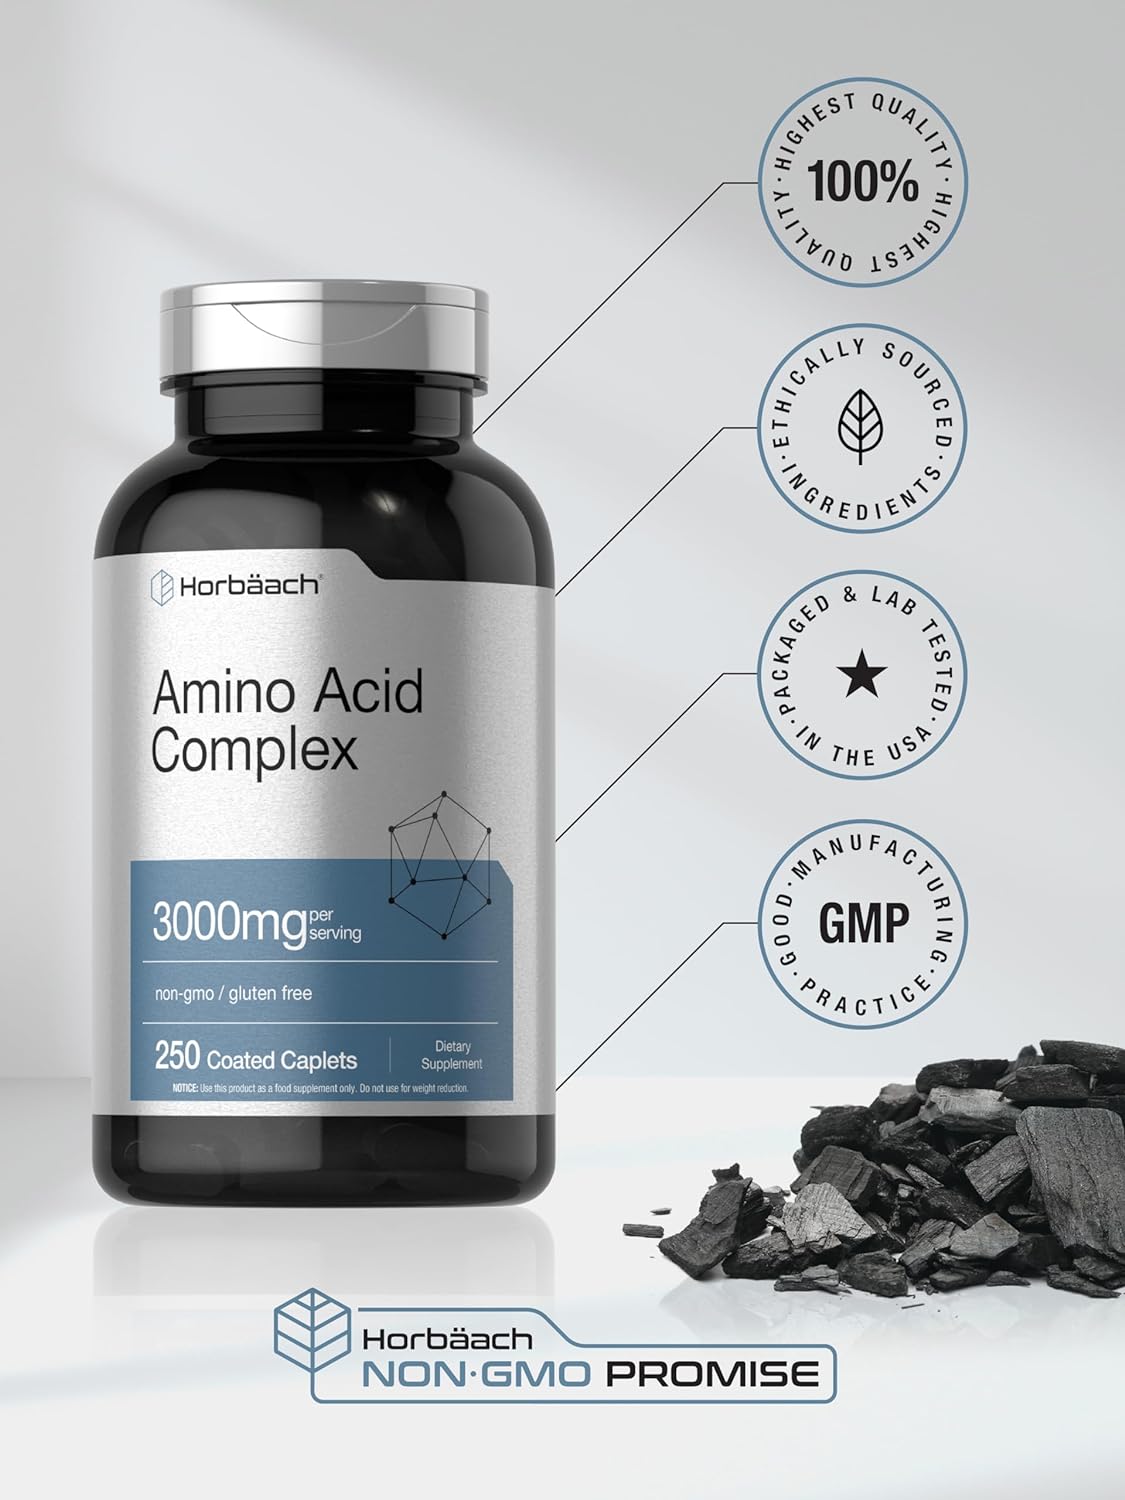 Amino Acid Complex 3000mg | 250 Caplets | by Horbaach - image 5 of 7